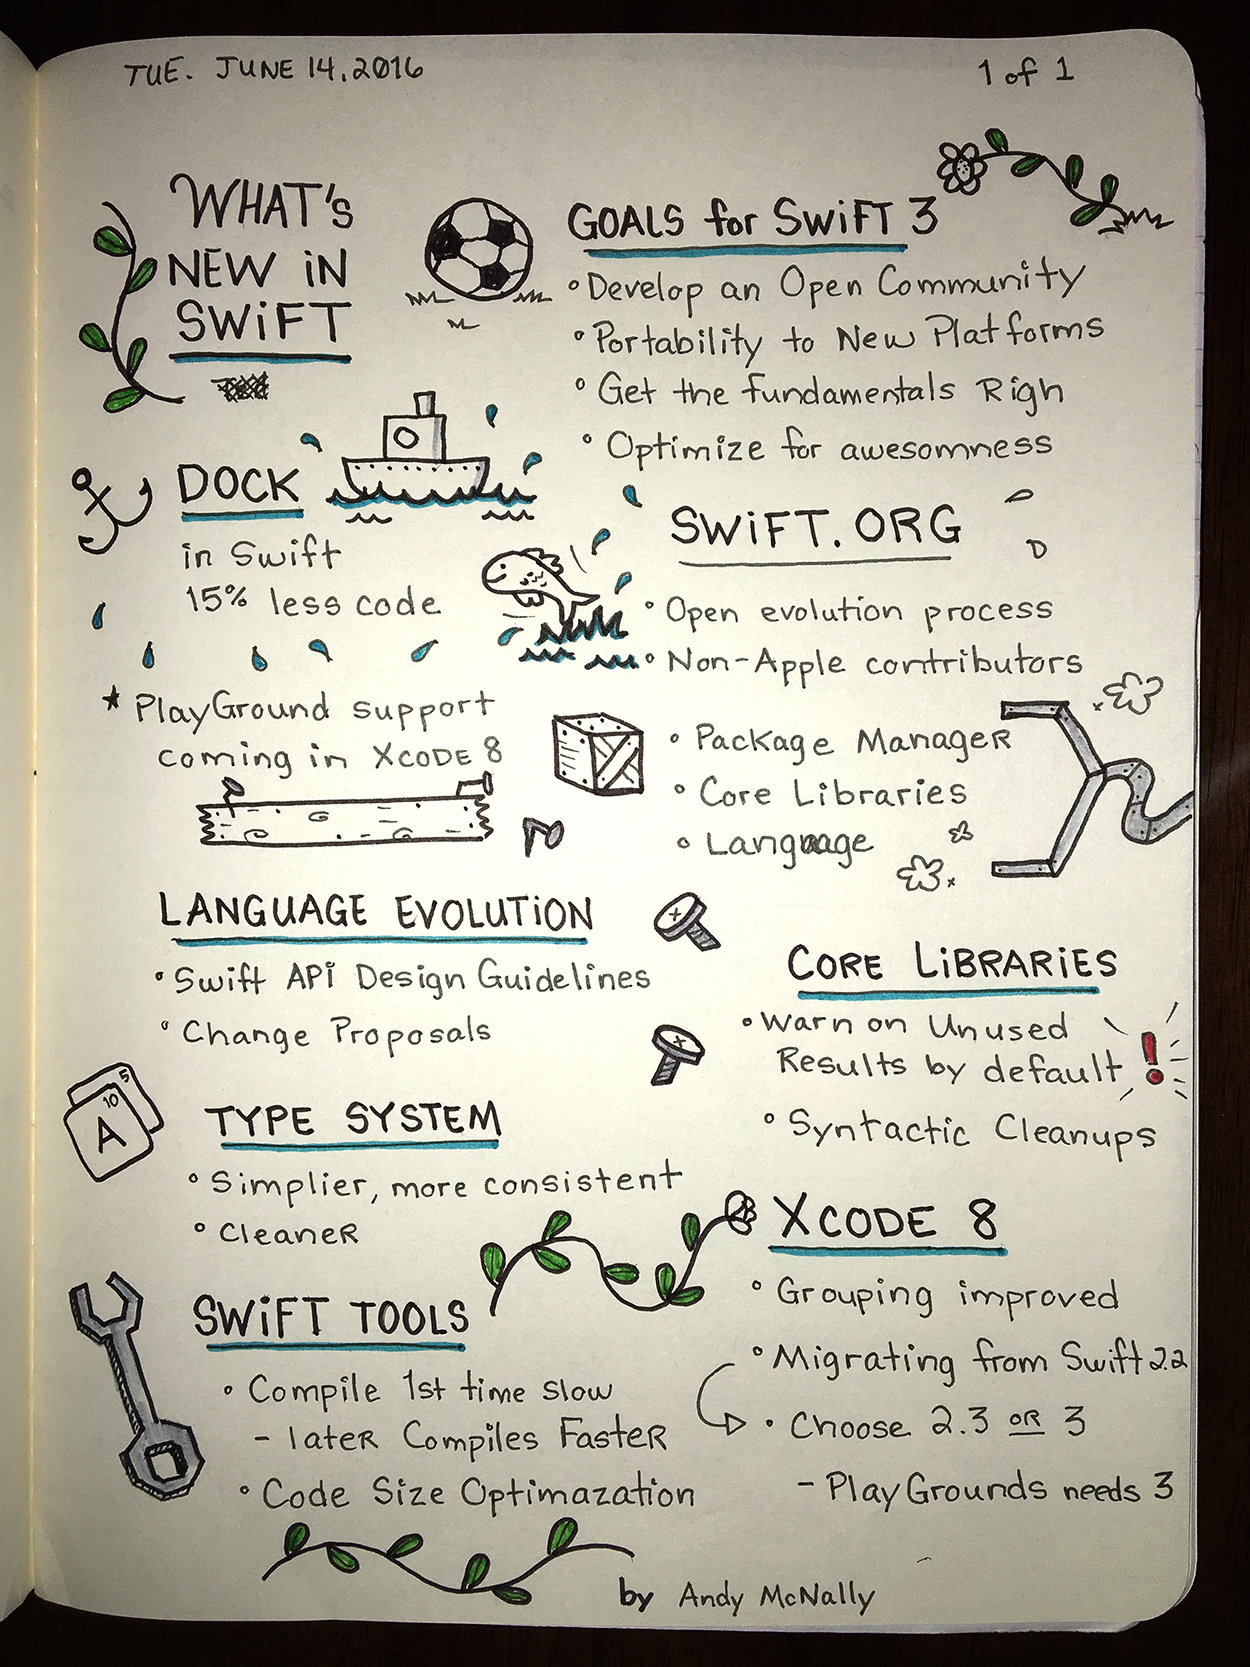 WWDC sketchnotes - What's New in Swift